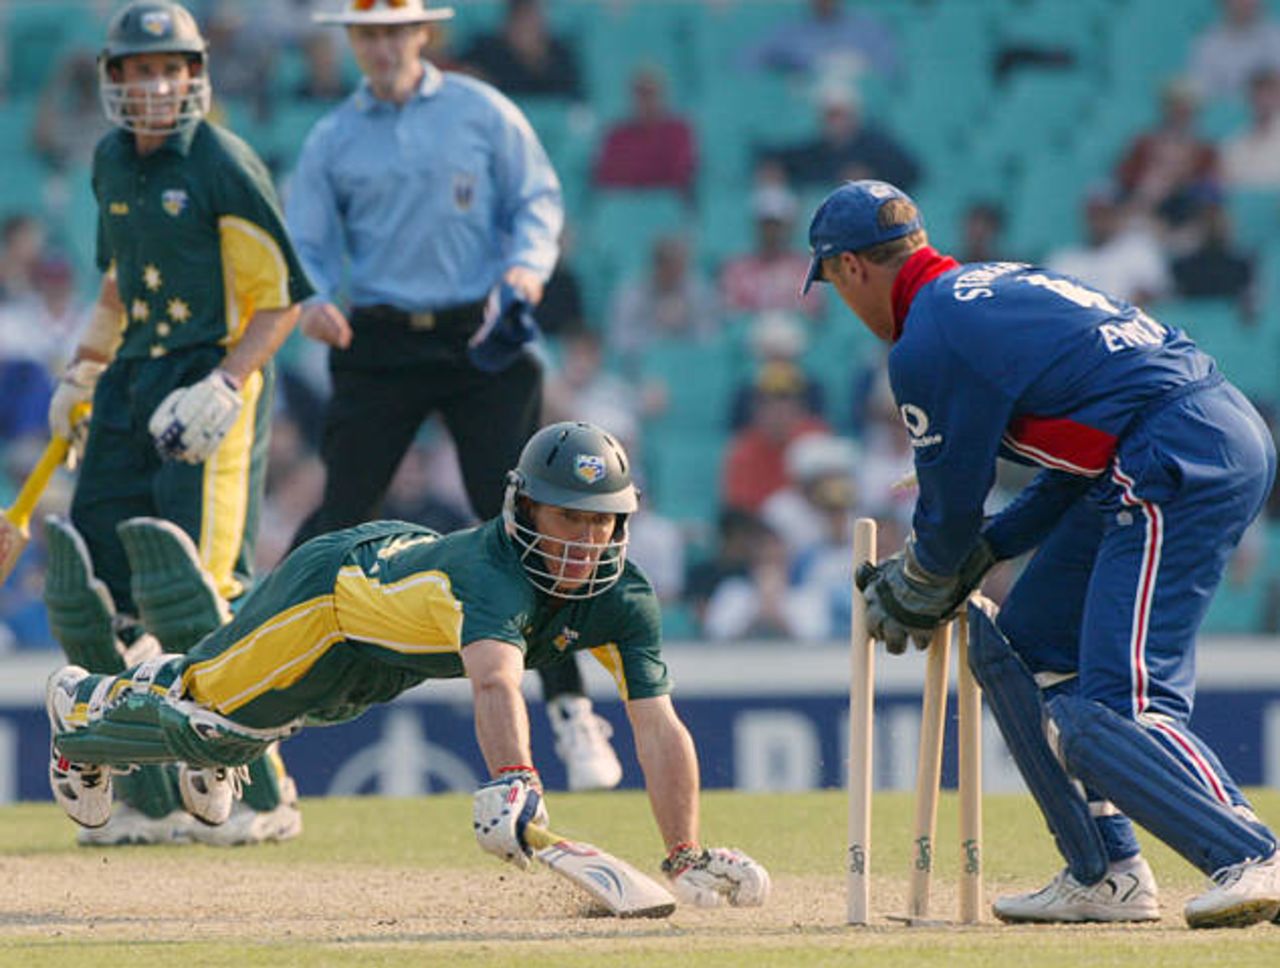 Australia A batsman Brad Hogg is run out by England's Alec Stewart as he attempts to dive back into the crease in Sydney, 8 Dec 2002